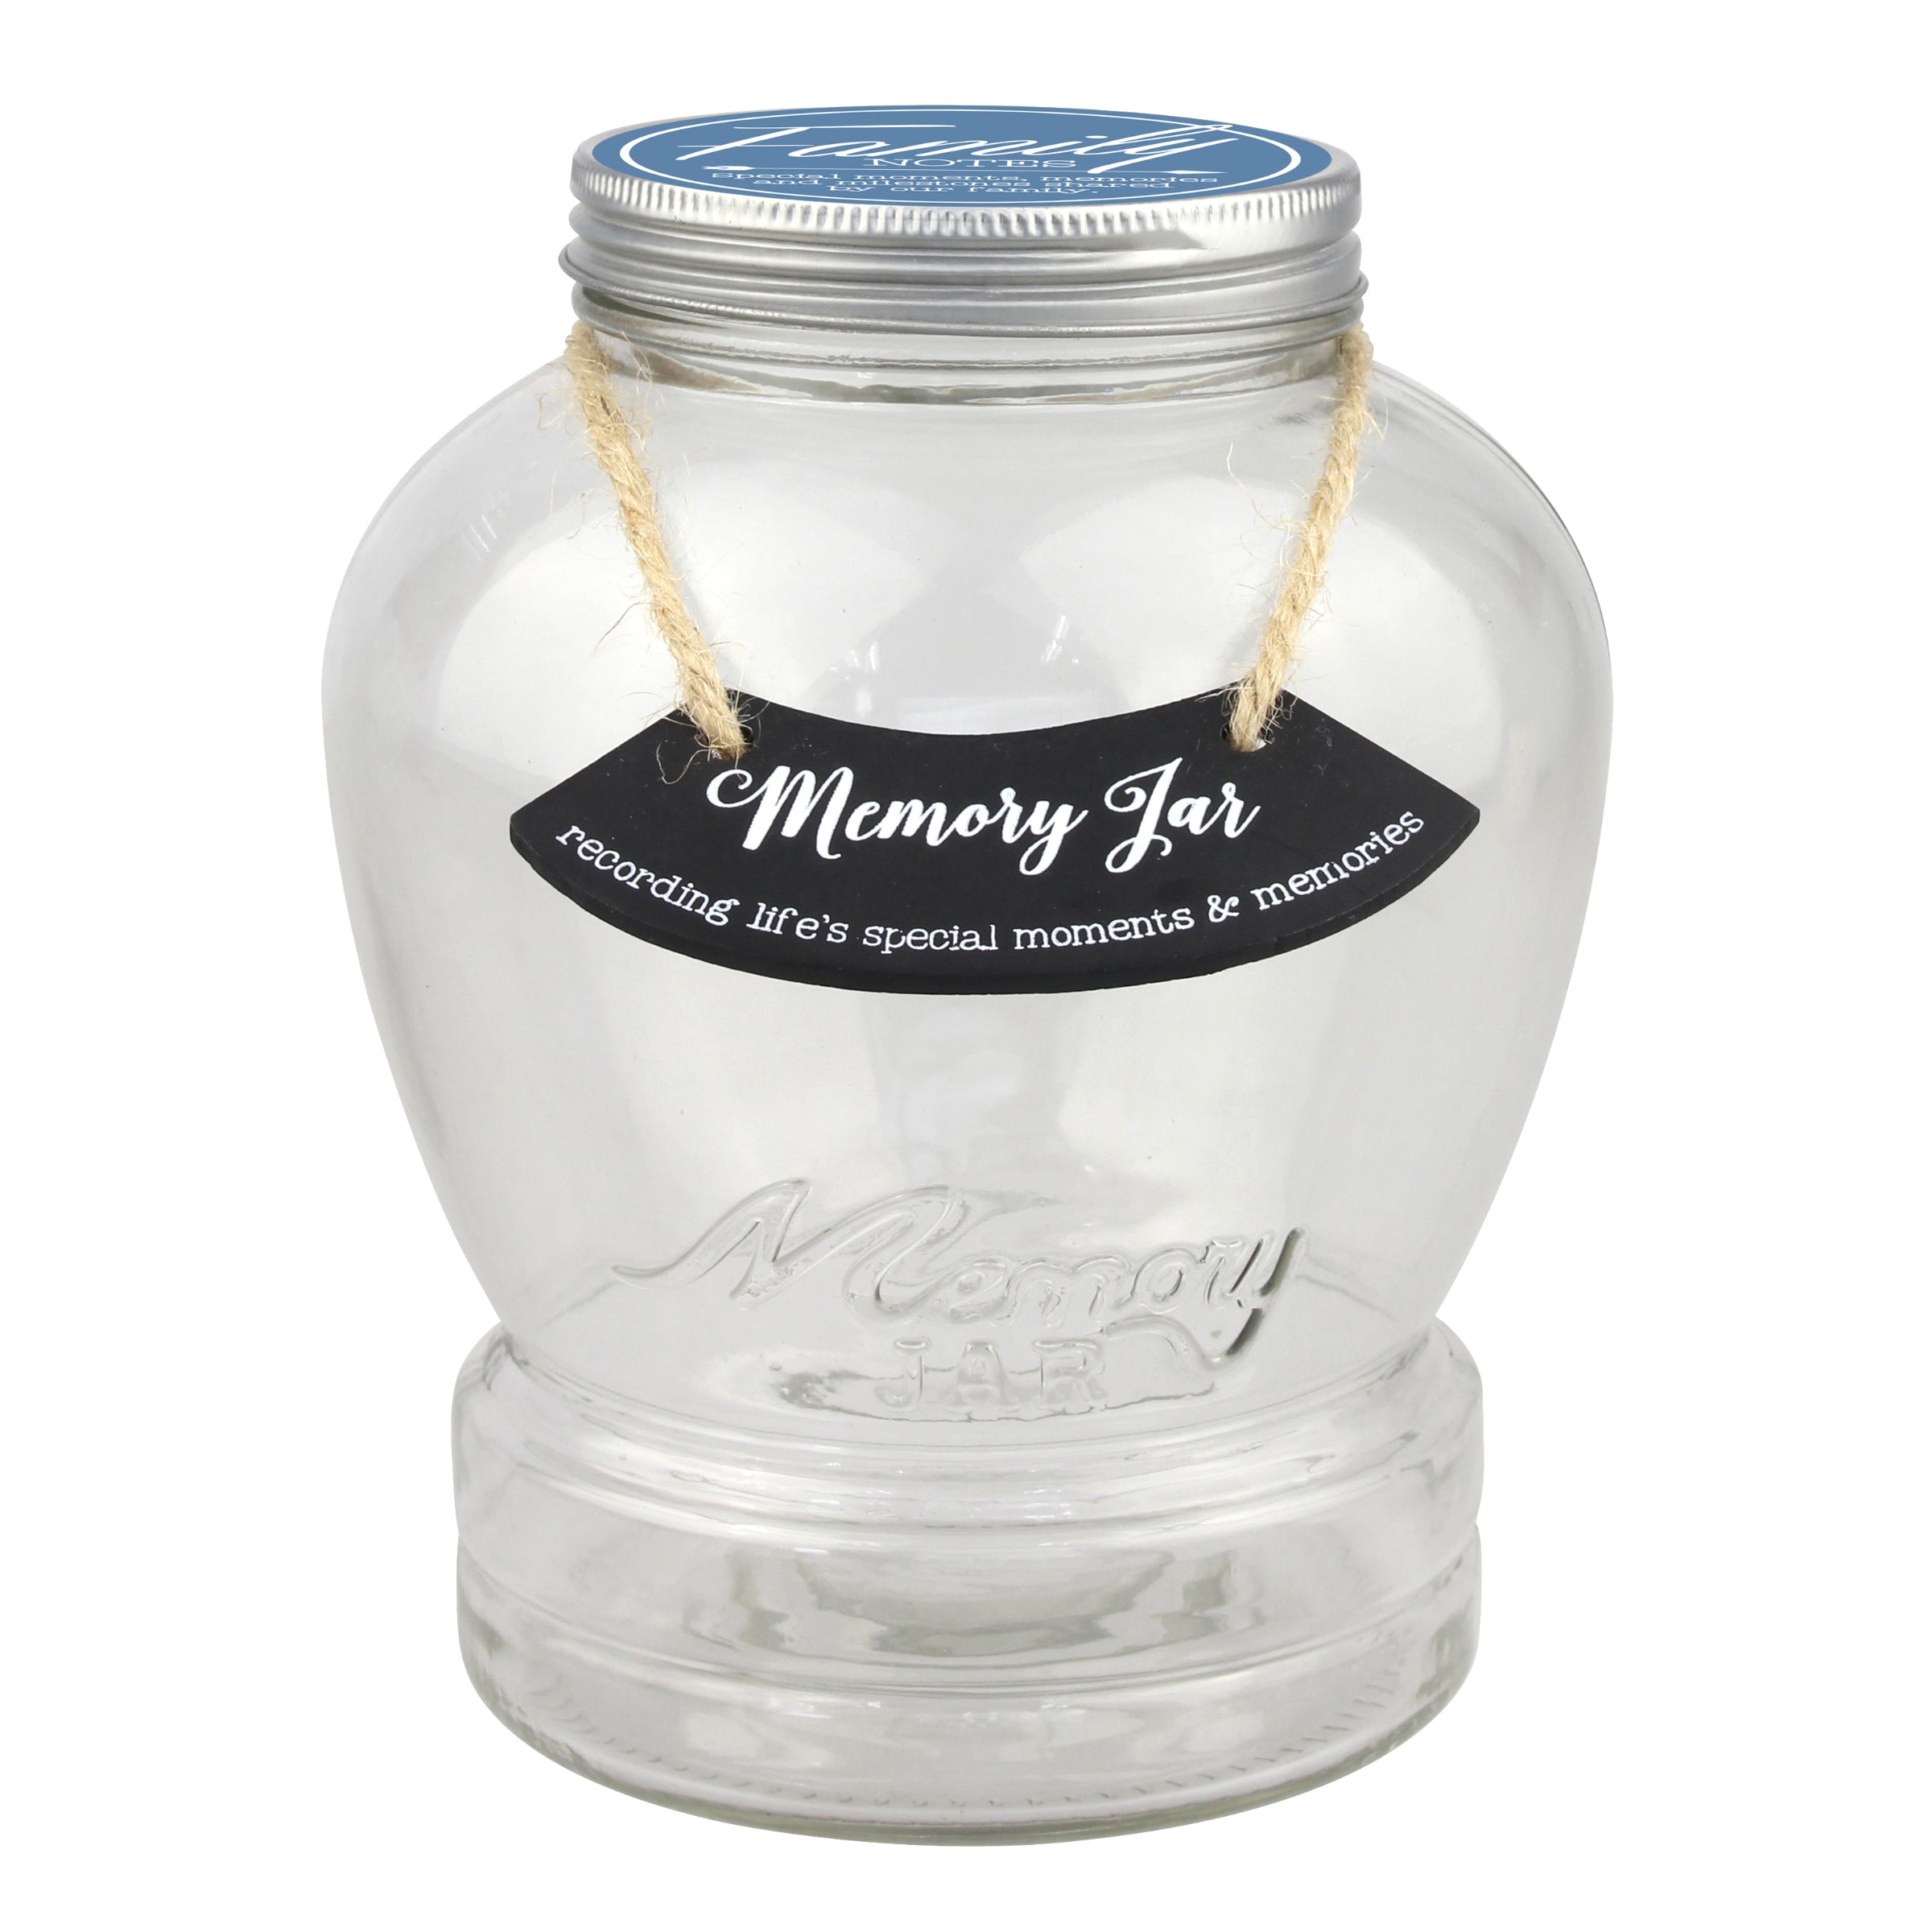 Top Shelf Family Memory Jar With 180 Tickets, Pen, and Decorative Lid